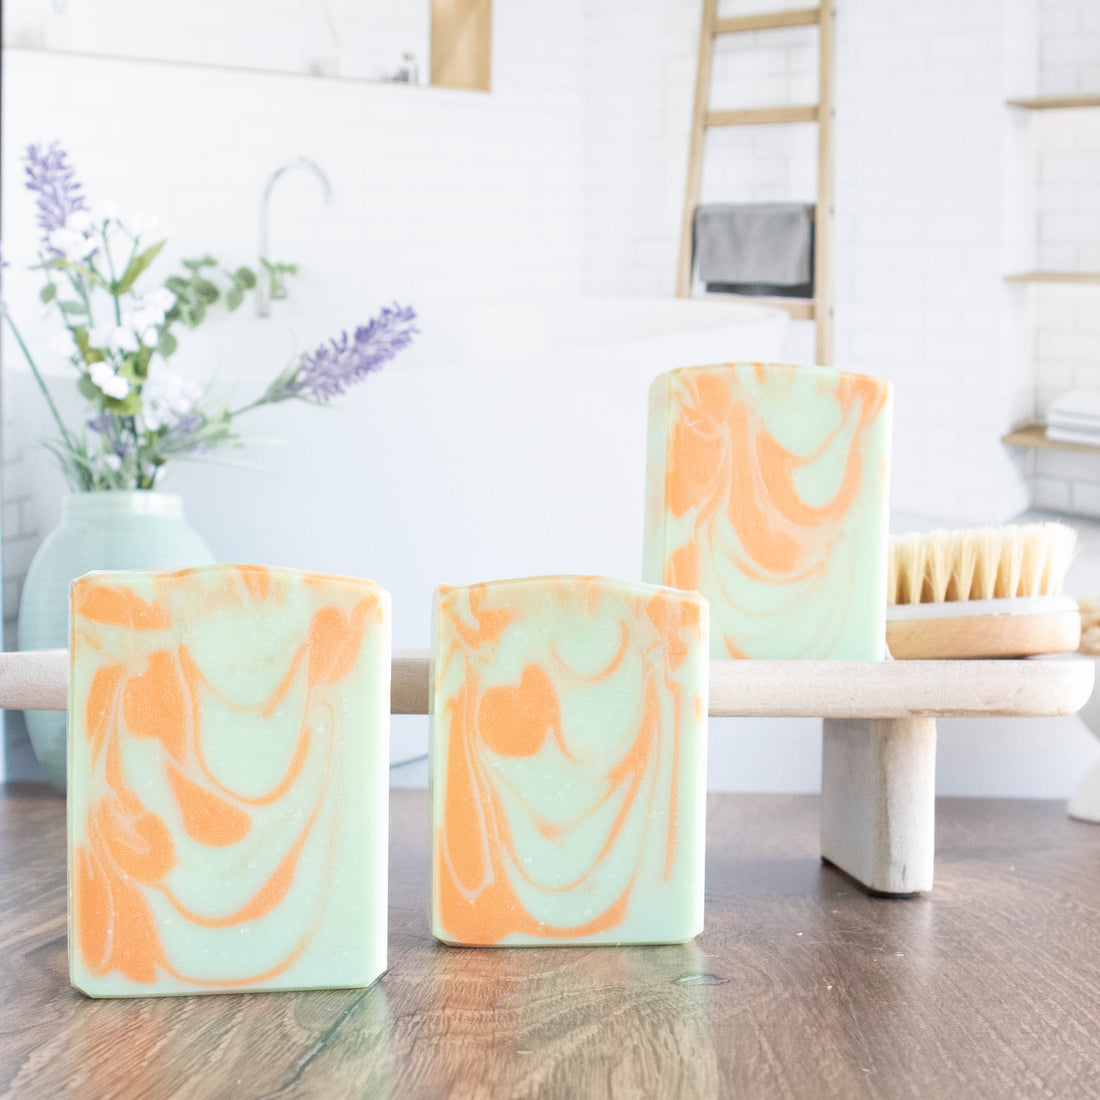 3 agave nectar and lime blossom soaps are shown. they are a light green with an orange swirl. Ons soap is on a wooden stand. there is lavender flowers in a green vase in the background along with a body brush. there is a bathroom scene in the background as well.